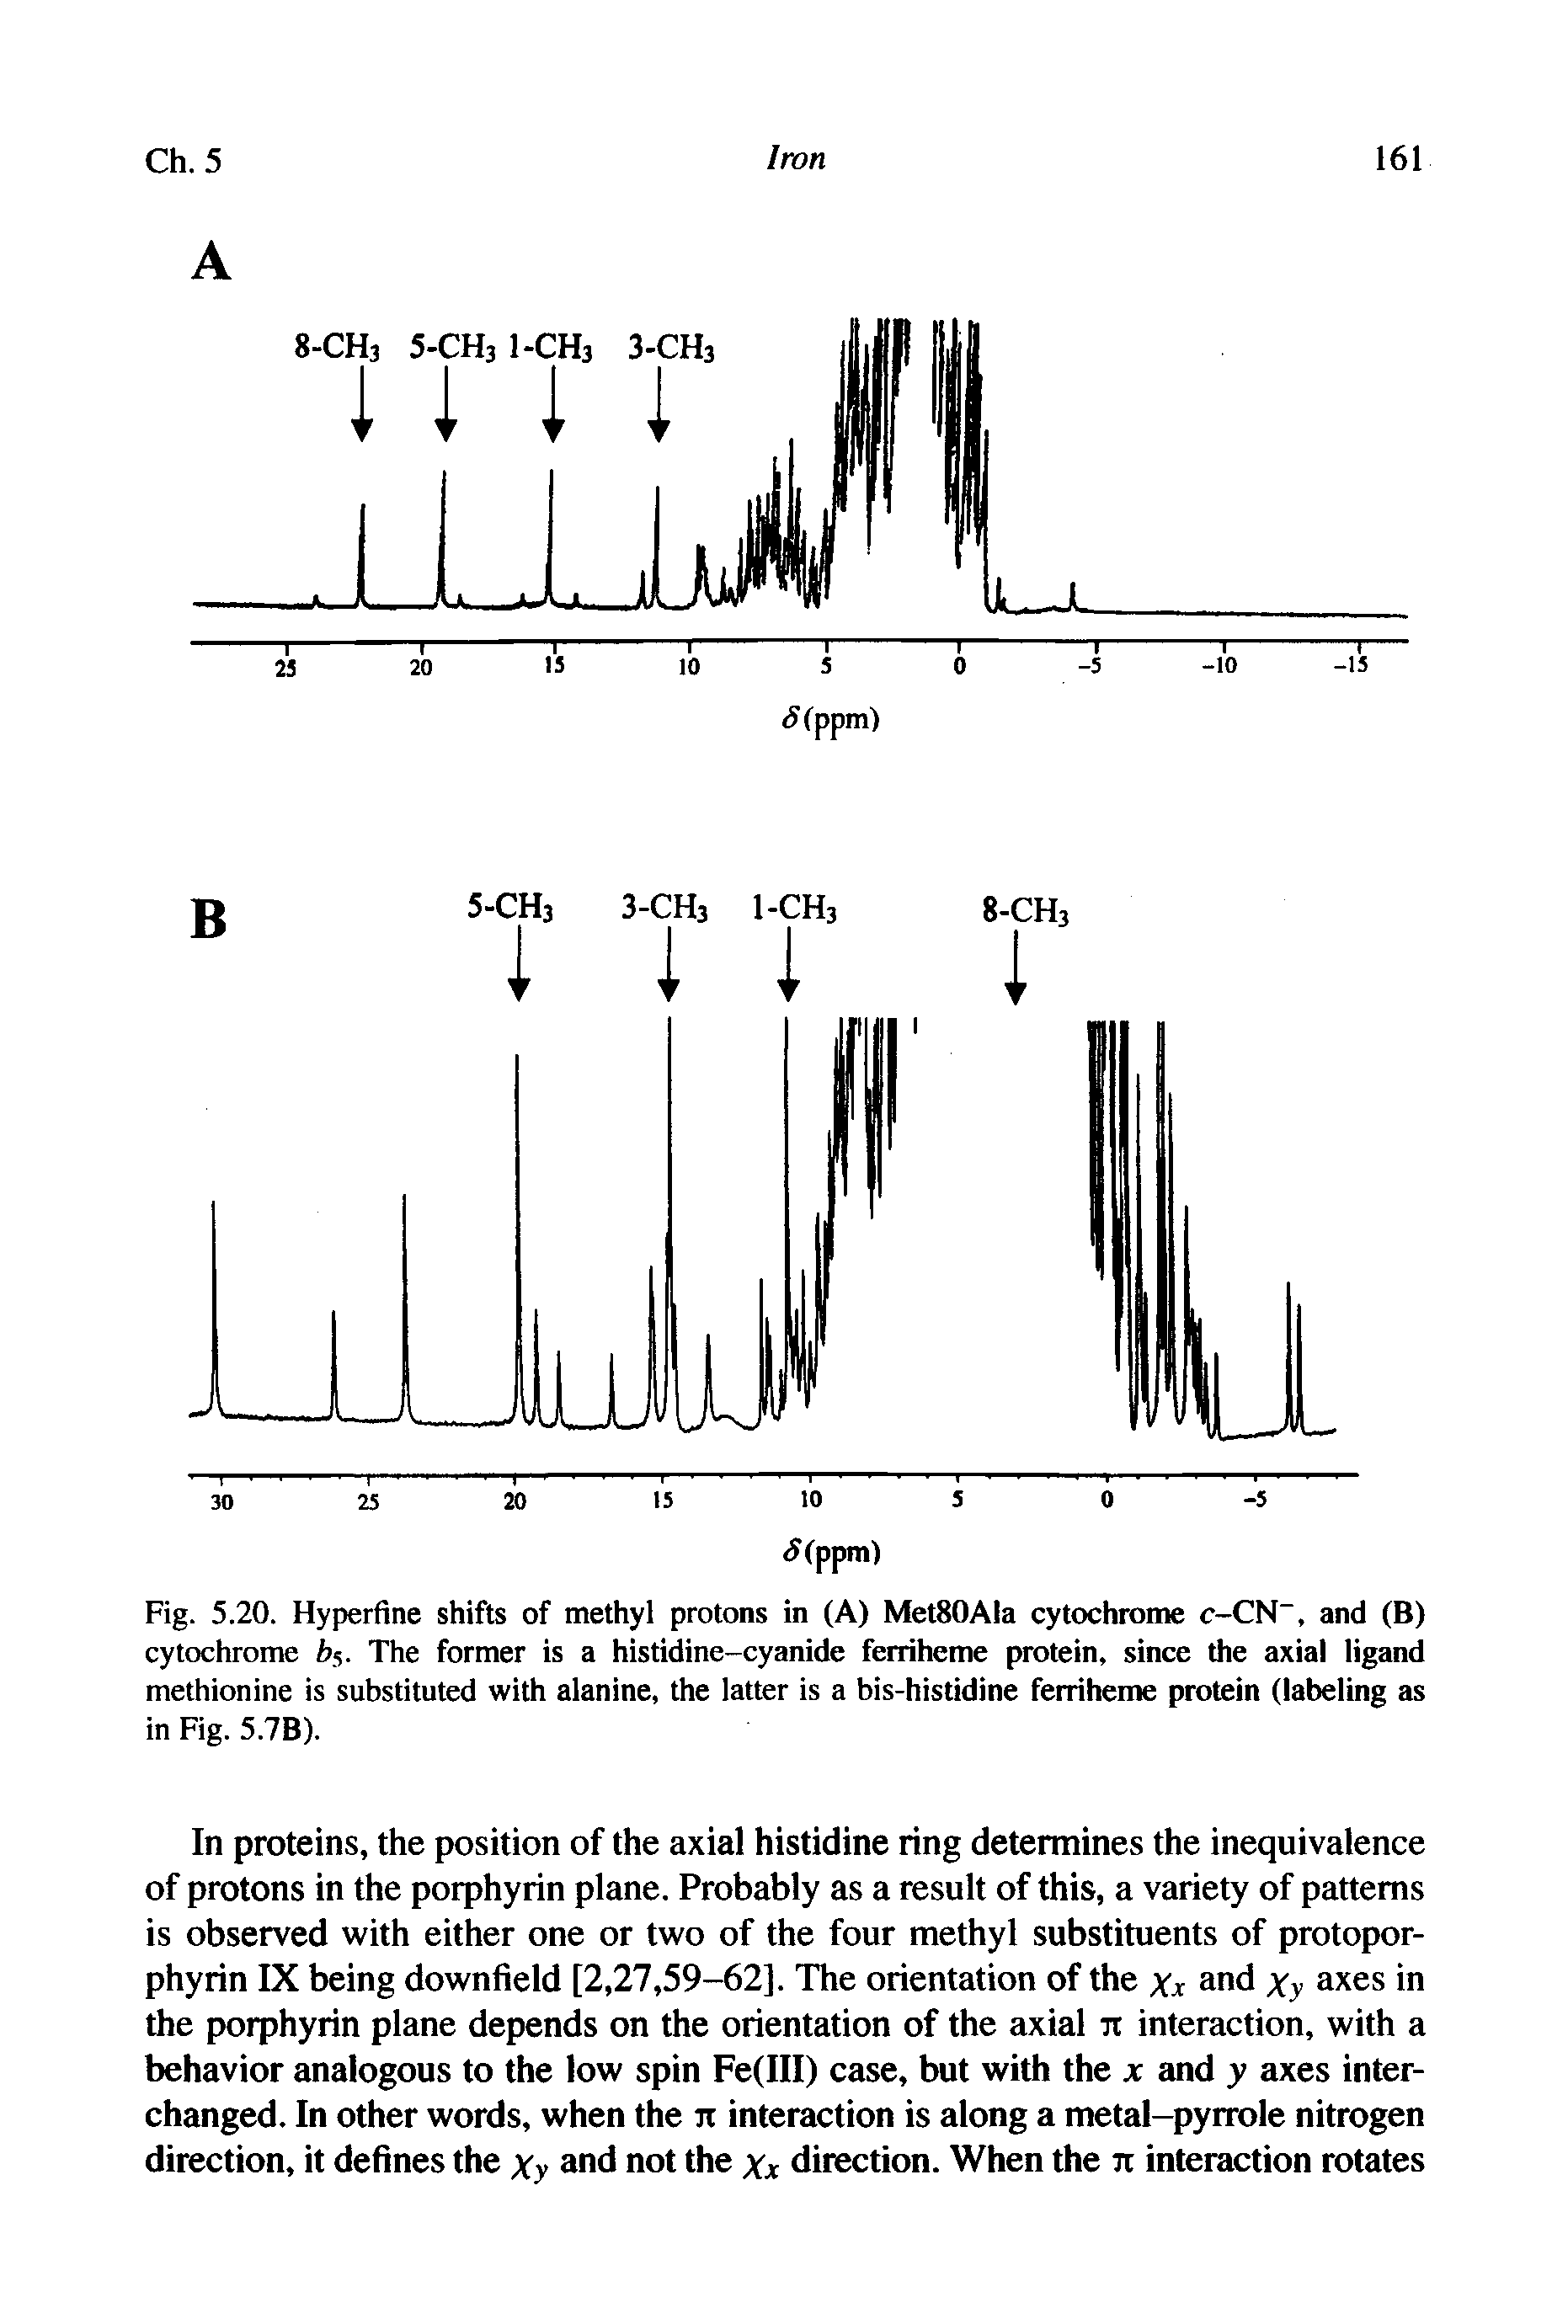 Fig. 5.20. Hyperfine shifts of methyl protons in (A) Met80Ala cytochrome c-CN-, and (B) cytochrome b5. The former is a histidine-cyanide ferriheme protein, since the axial ligand methionine is substituted with alanine, the latter is a bis-histidine ferriheme protein (labeling as in Fig. 5.7B).